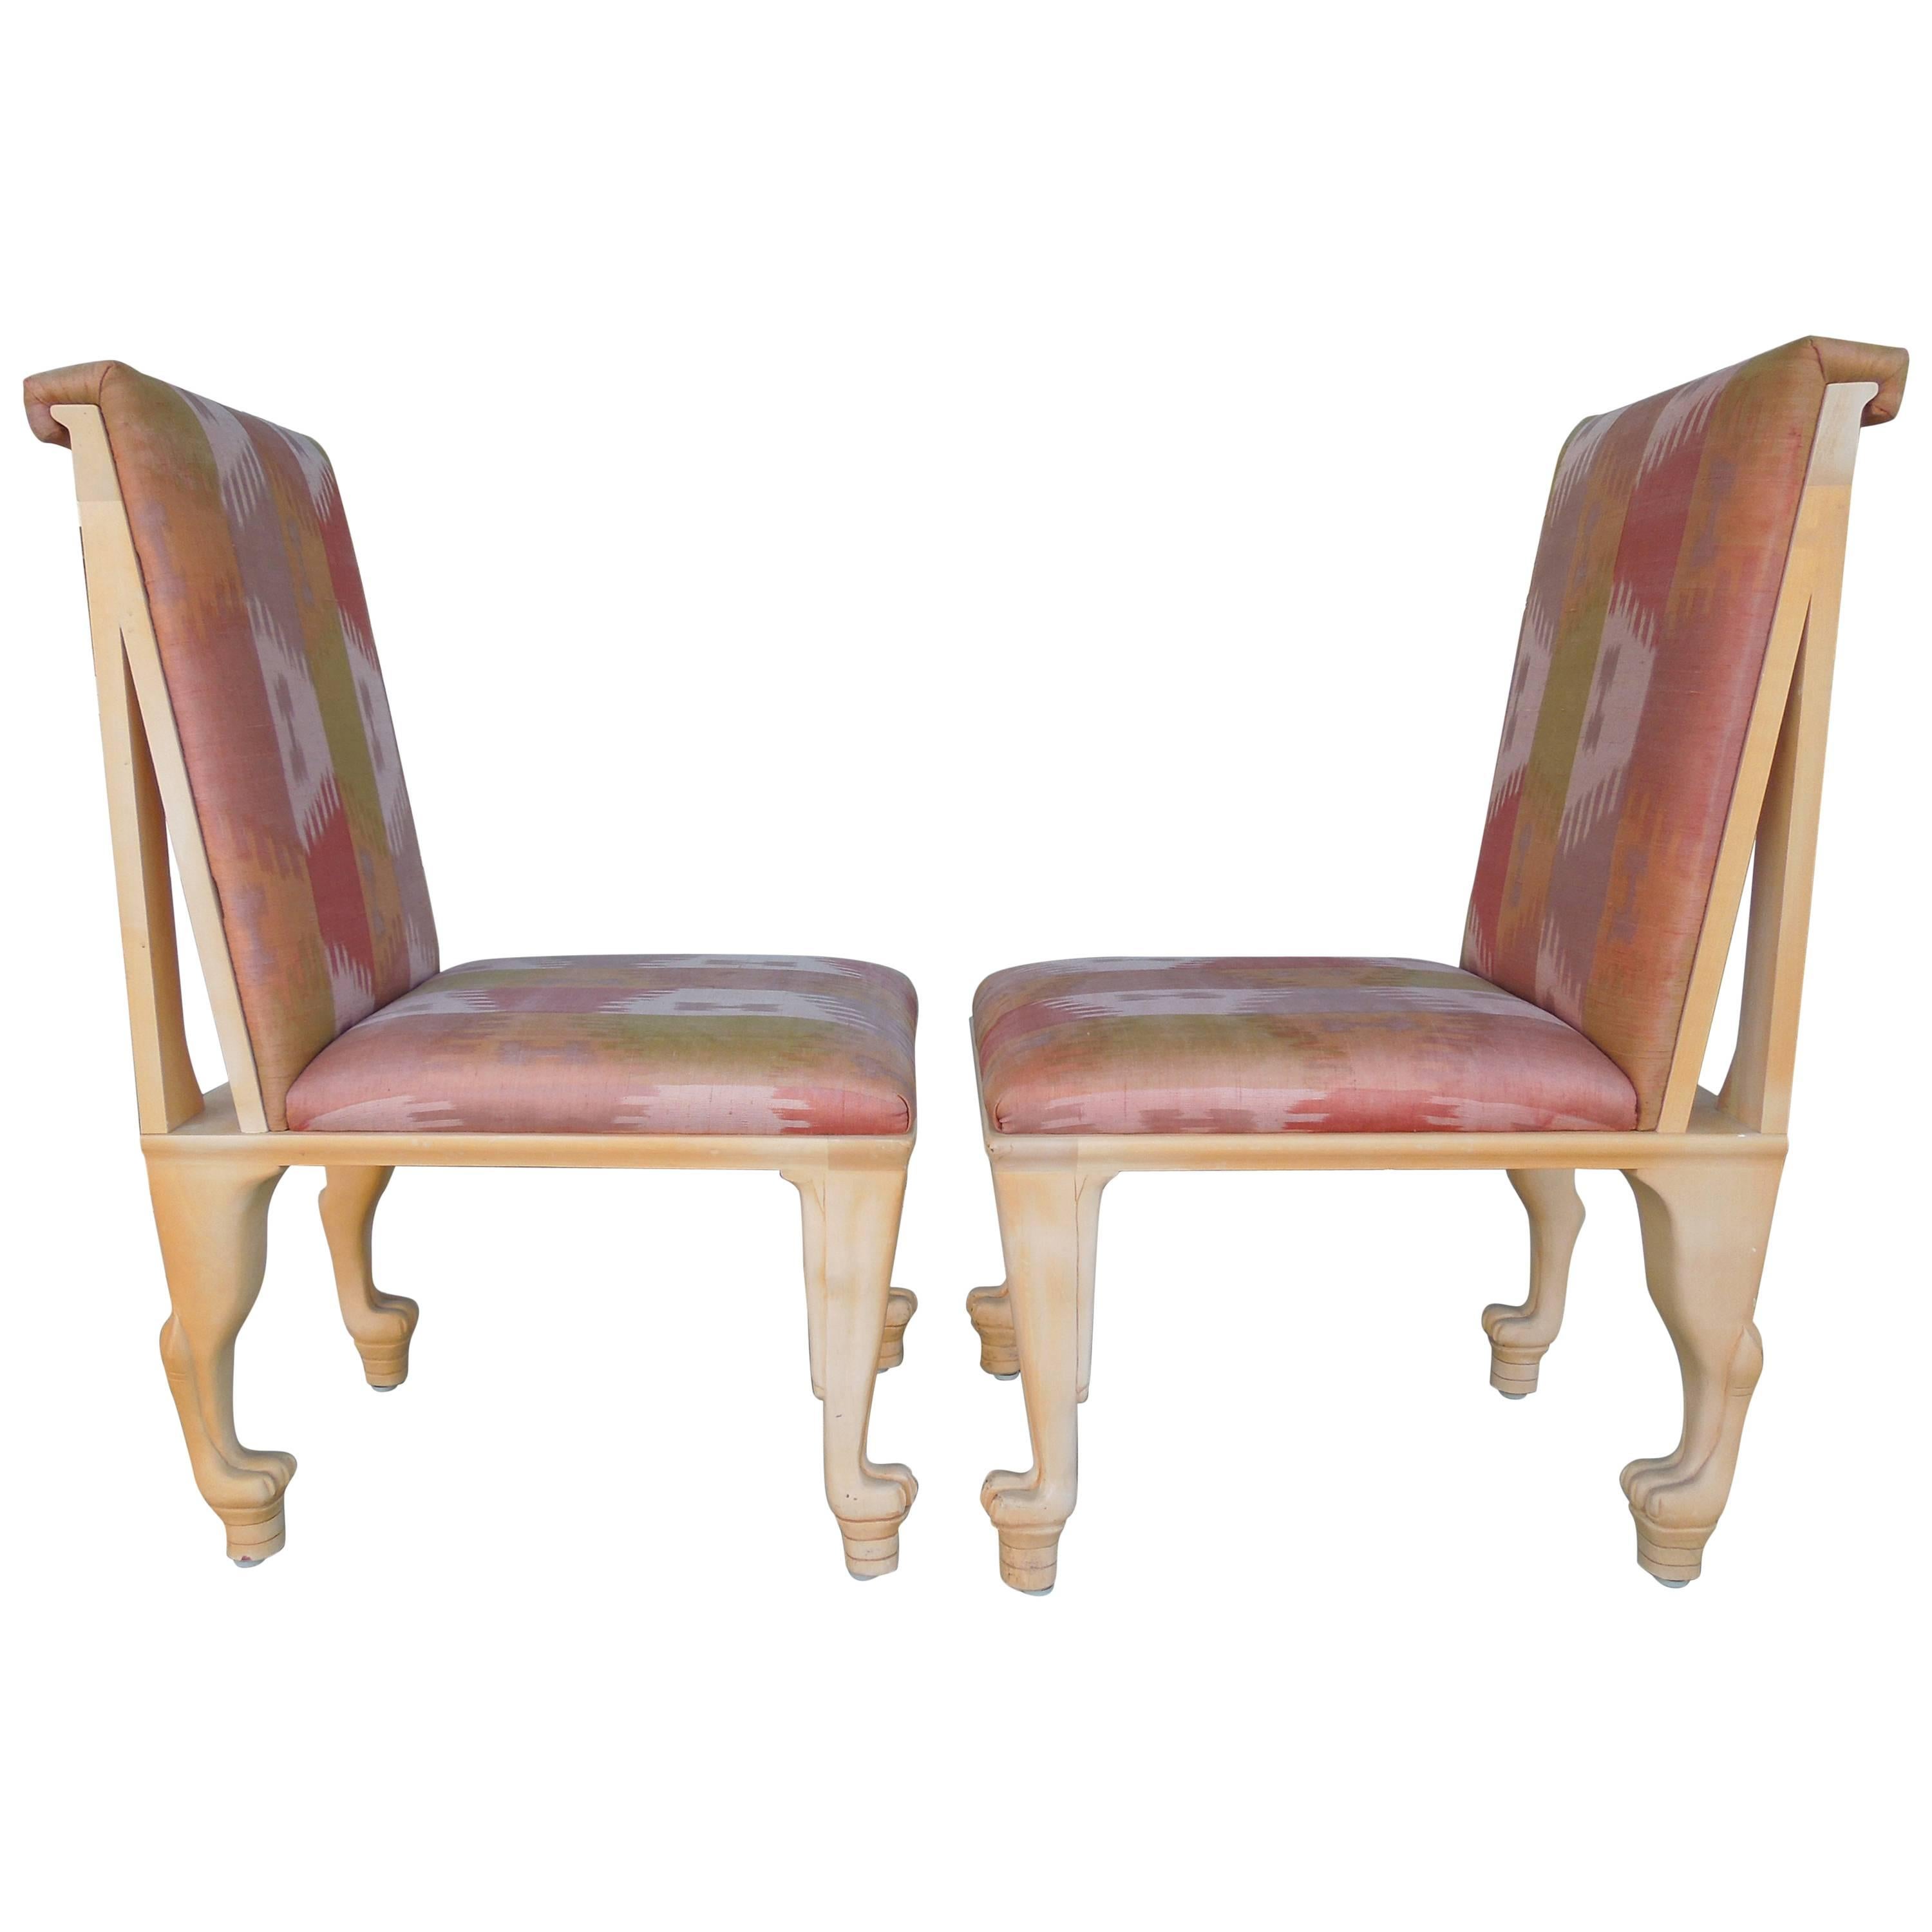  Pair of Silk Ikat Randolph & Hein "Thebes" Chairs  Designed by John Hutton